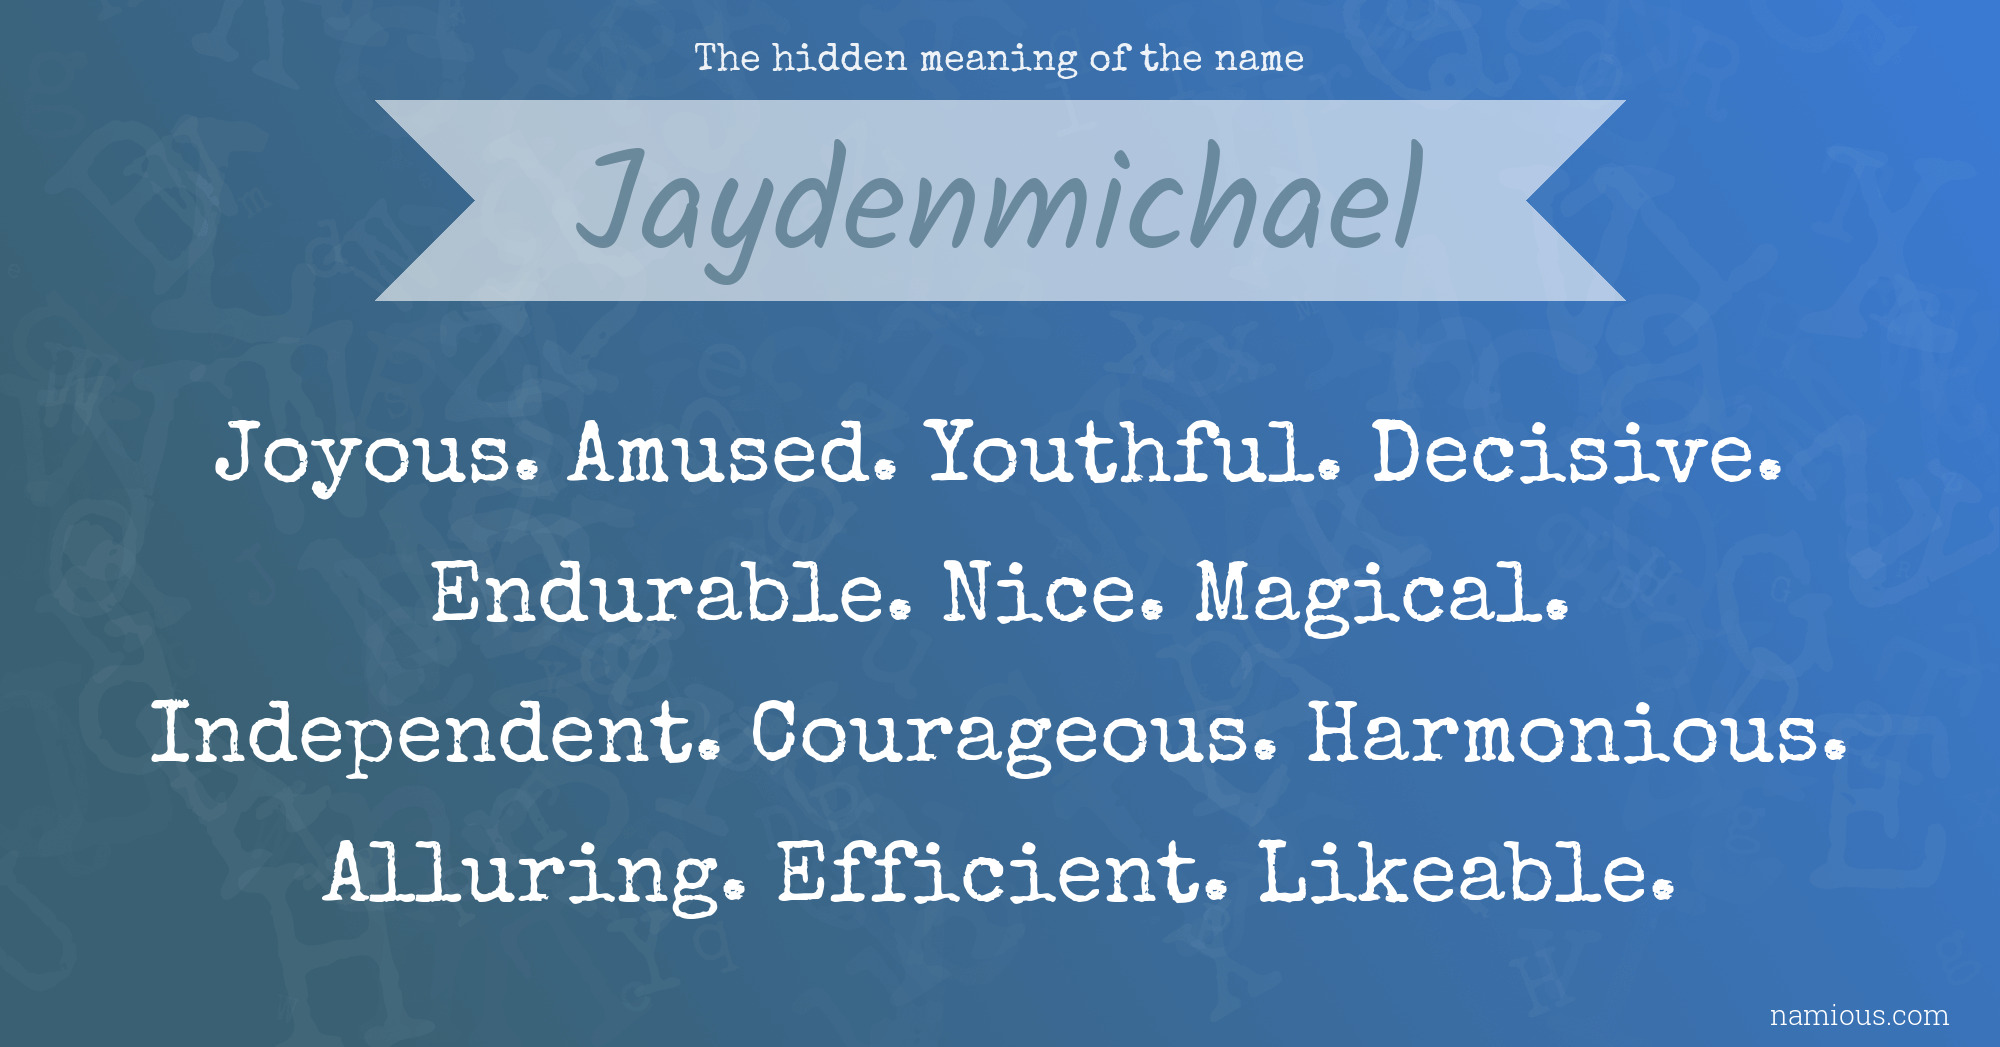 The hidden meaning of the name Jaydenmichael